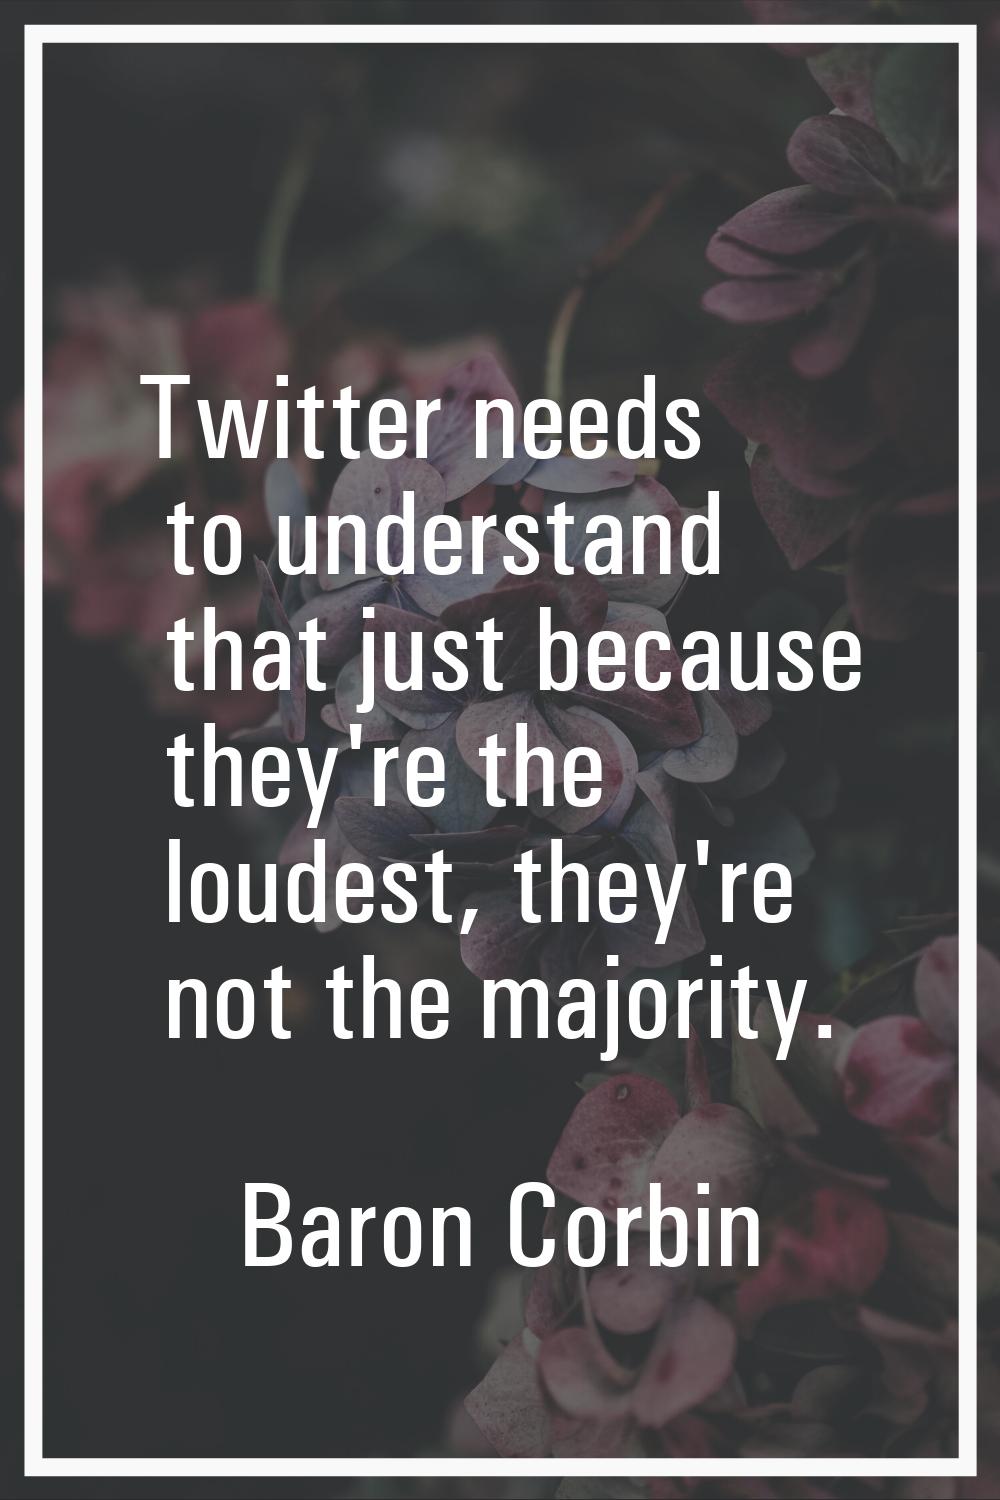 Twitter needs to understand that just because they're the loudest, they're not the majority.